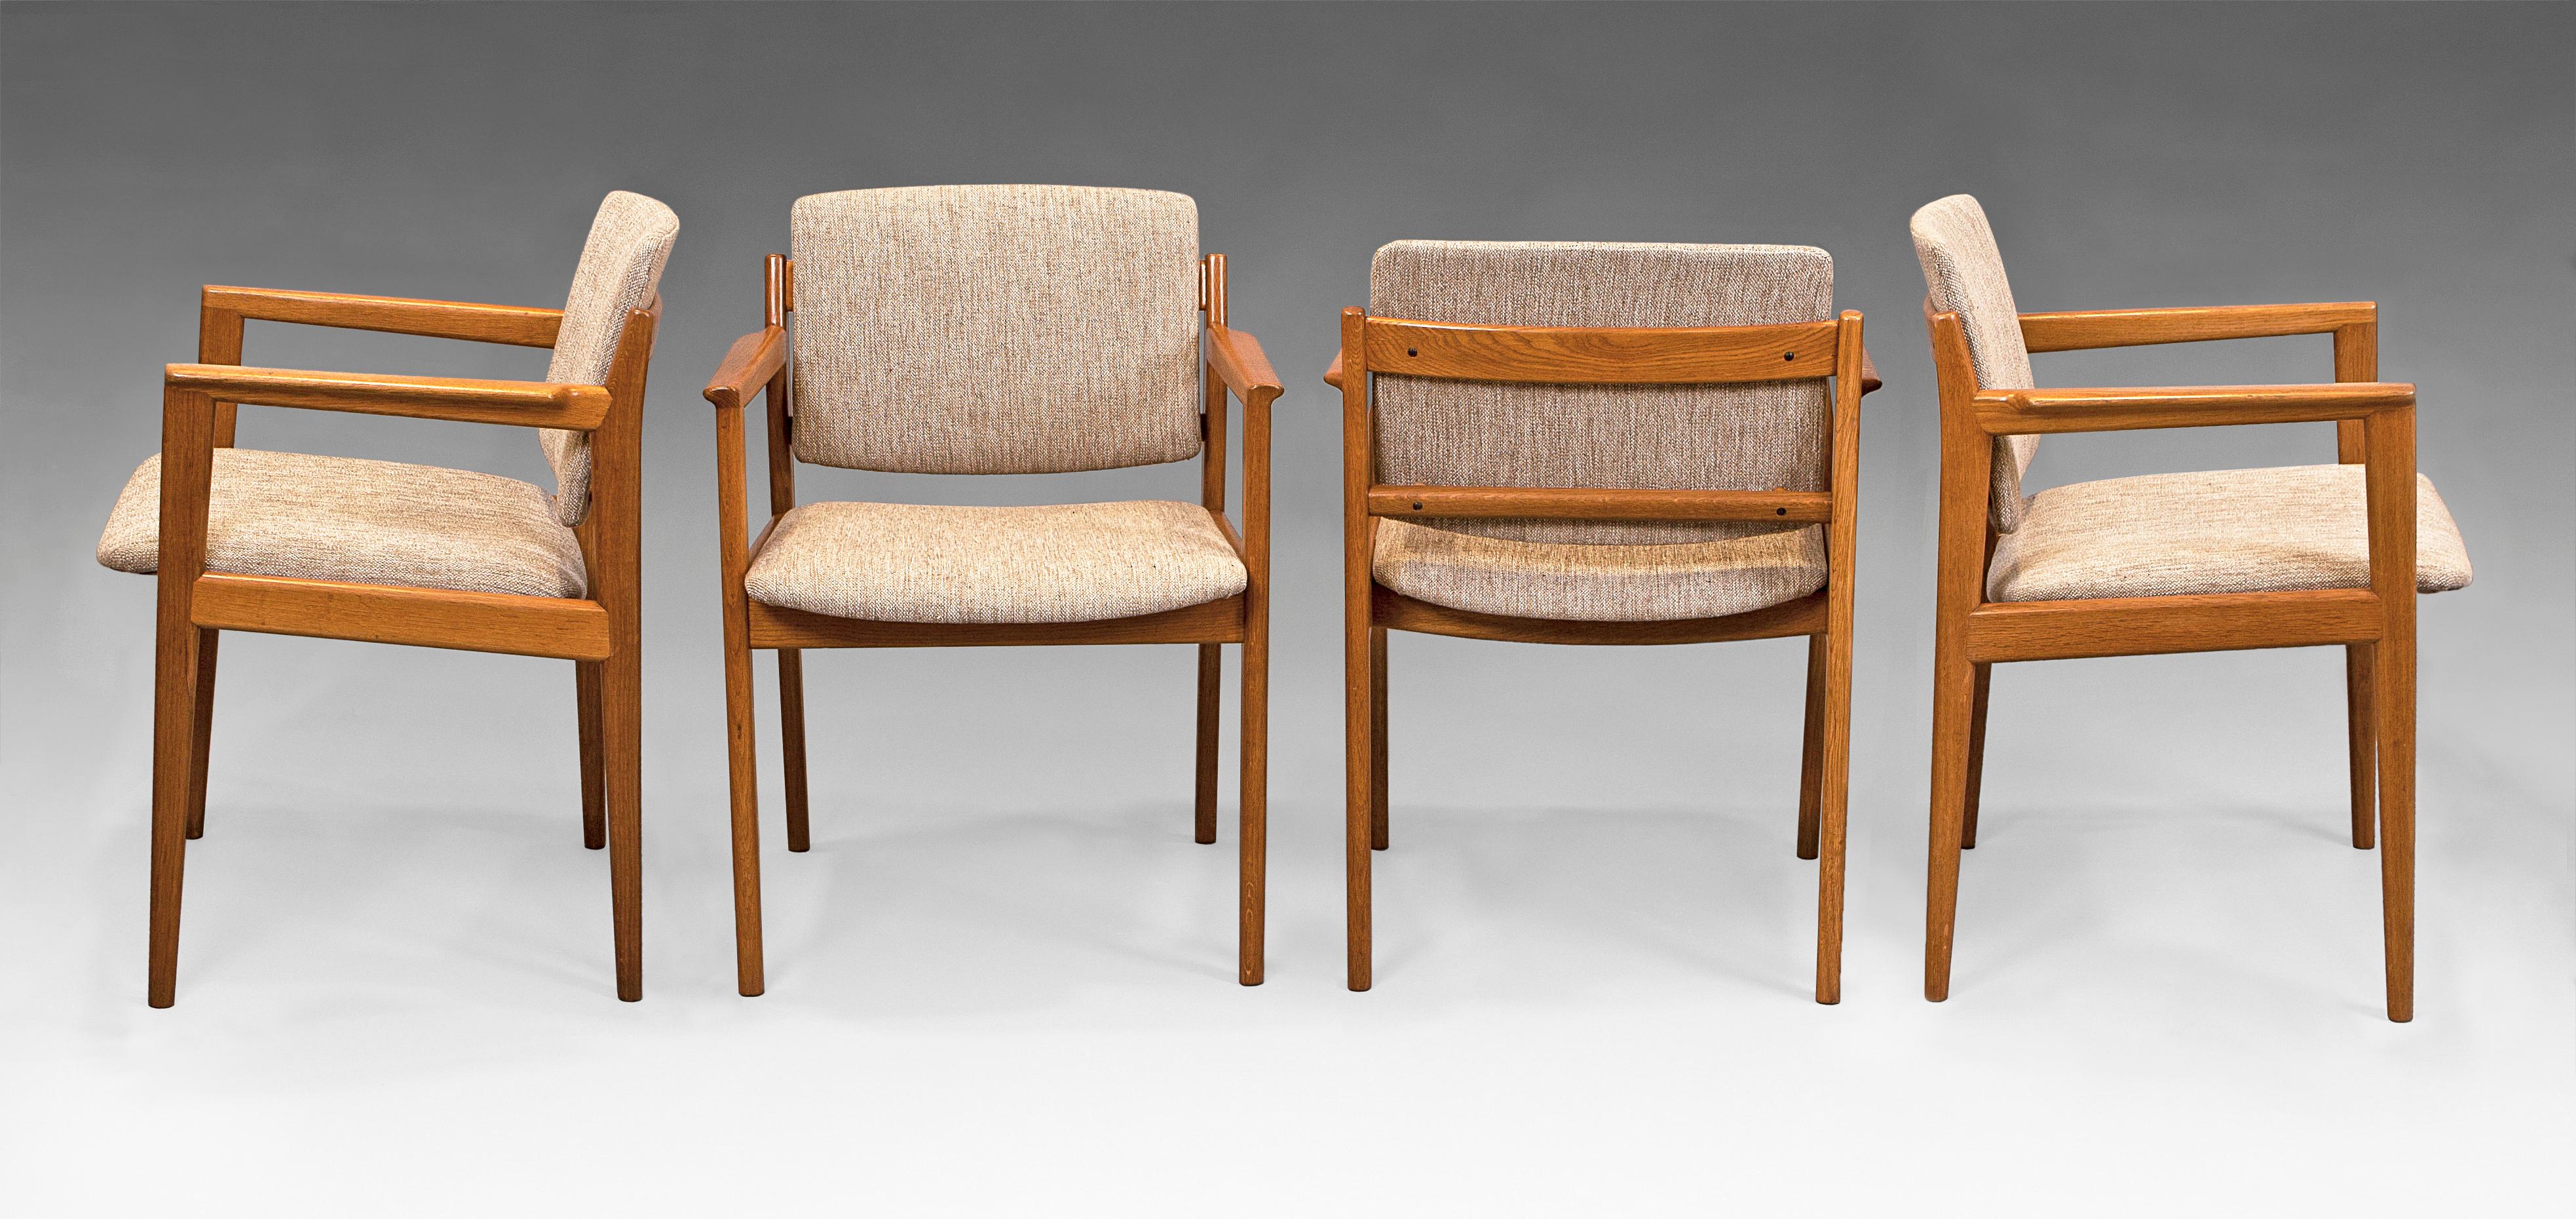 Karl Erik Ekselius armchairs in teak and upholstery for J.O. Carlsson, Vetlanda. Sweden, 1960´s.
Excellent condition and new beige/Brown tweed upholstery.
 